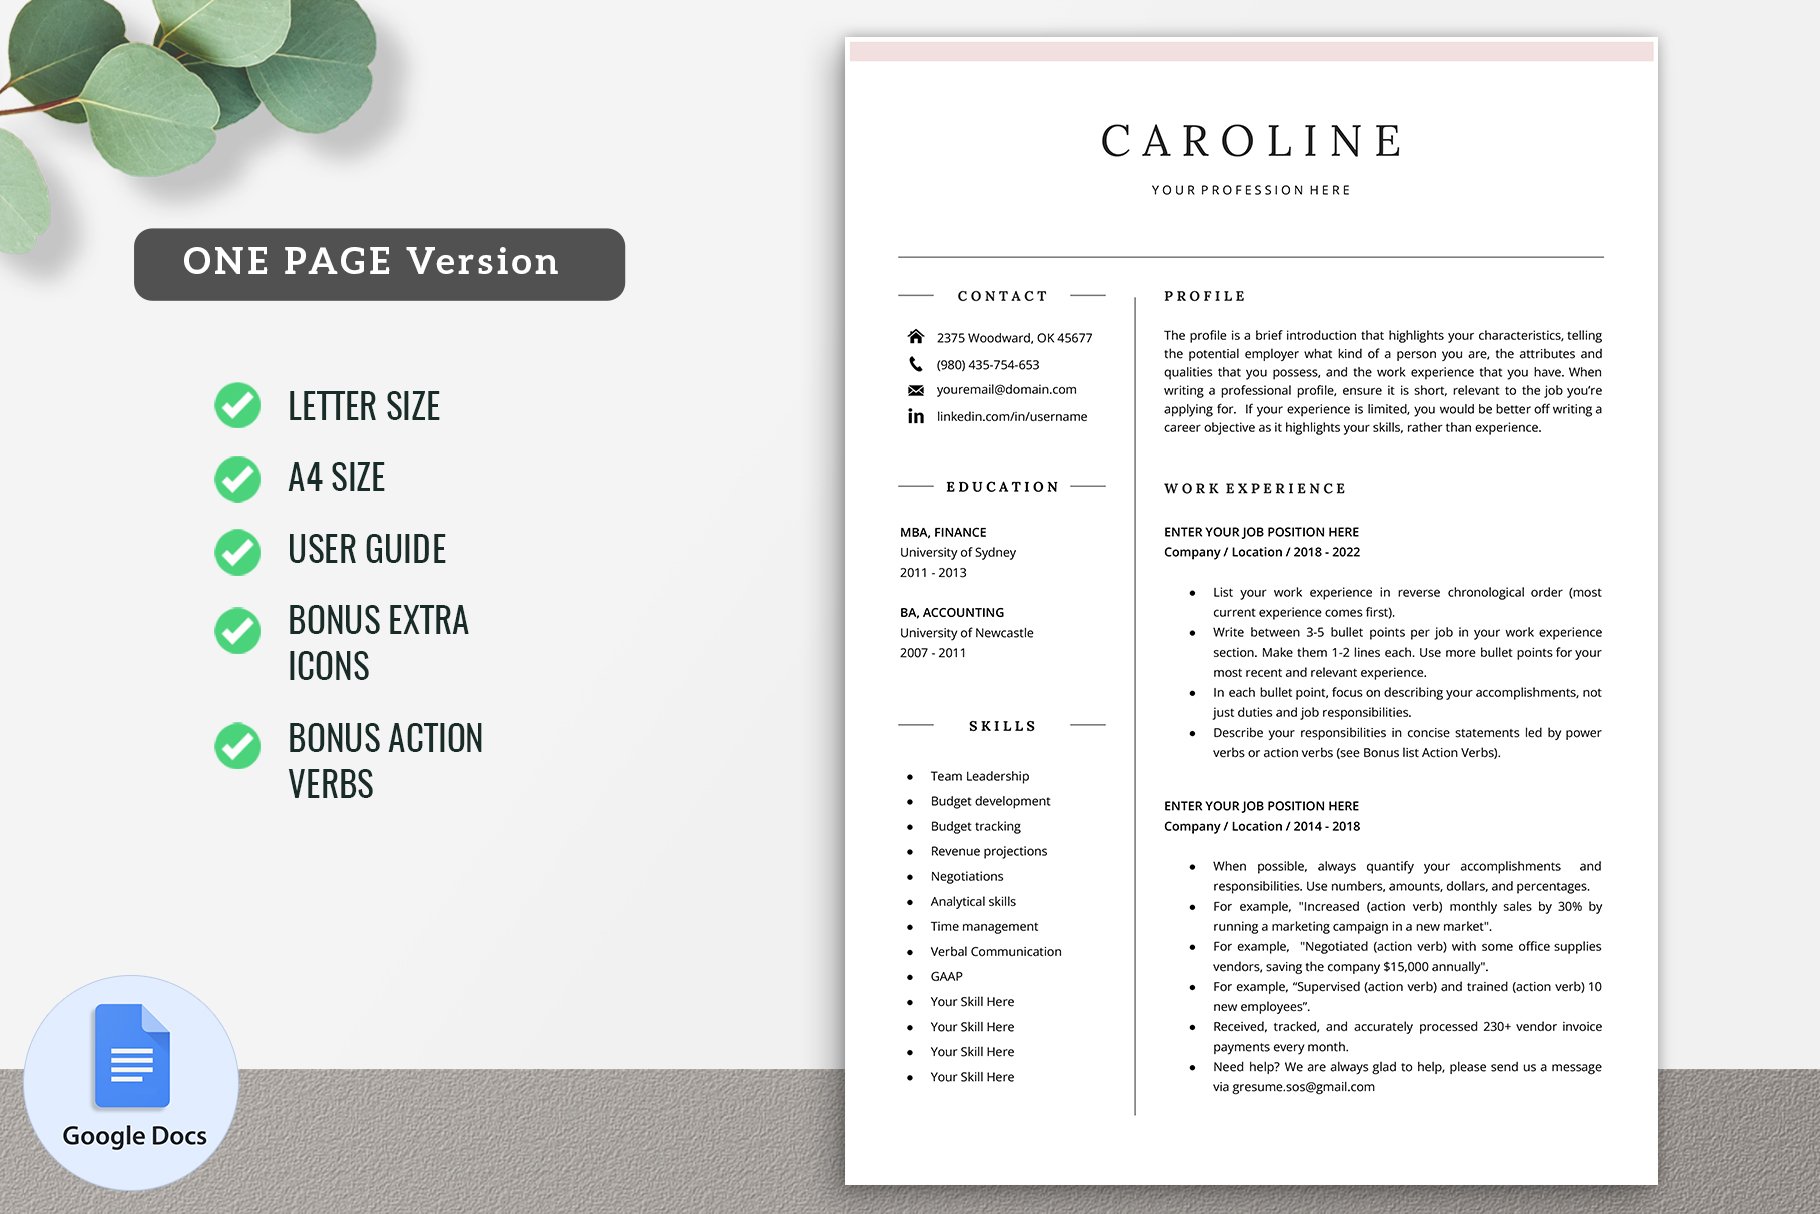 Google Docs Resume Template 03 preview image.